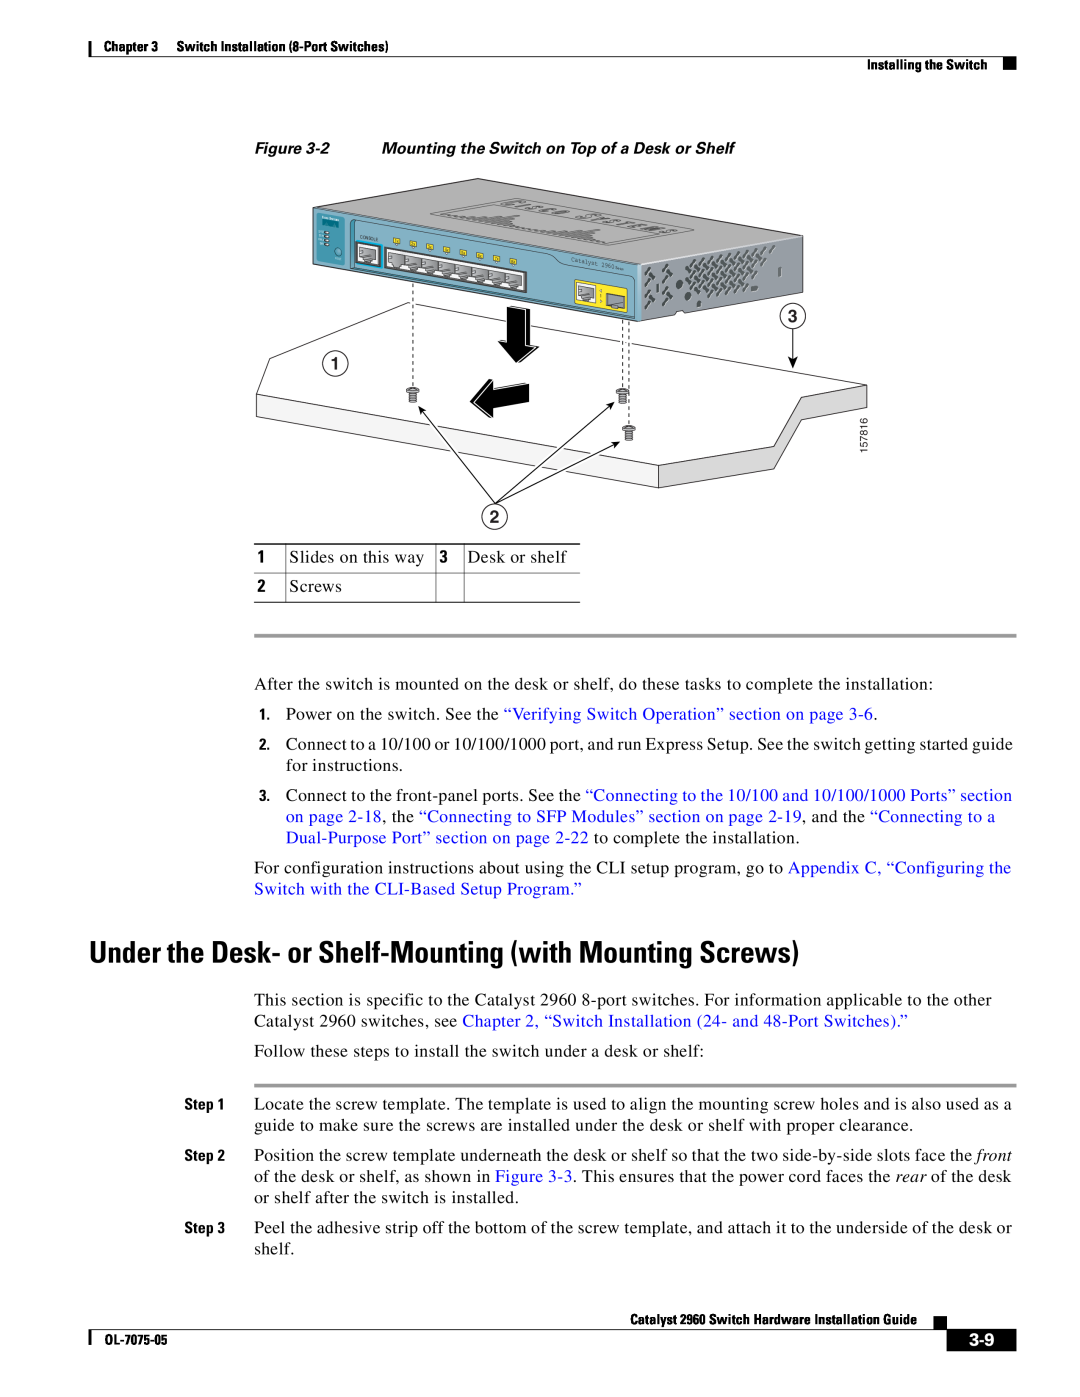 Cisco Systems 2960 Under the Desk- or Shelf-Mounting with Mounting Screws, 2 Mounting the Switch on Top of a Desk or Shelf 